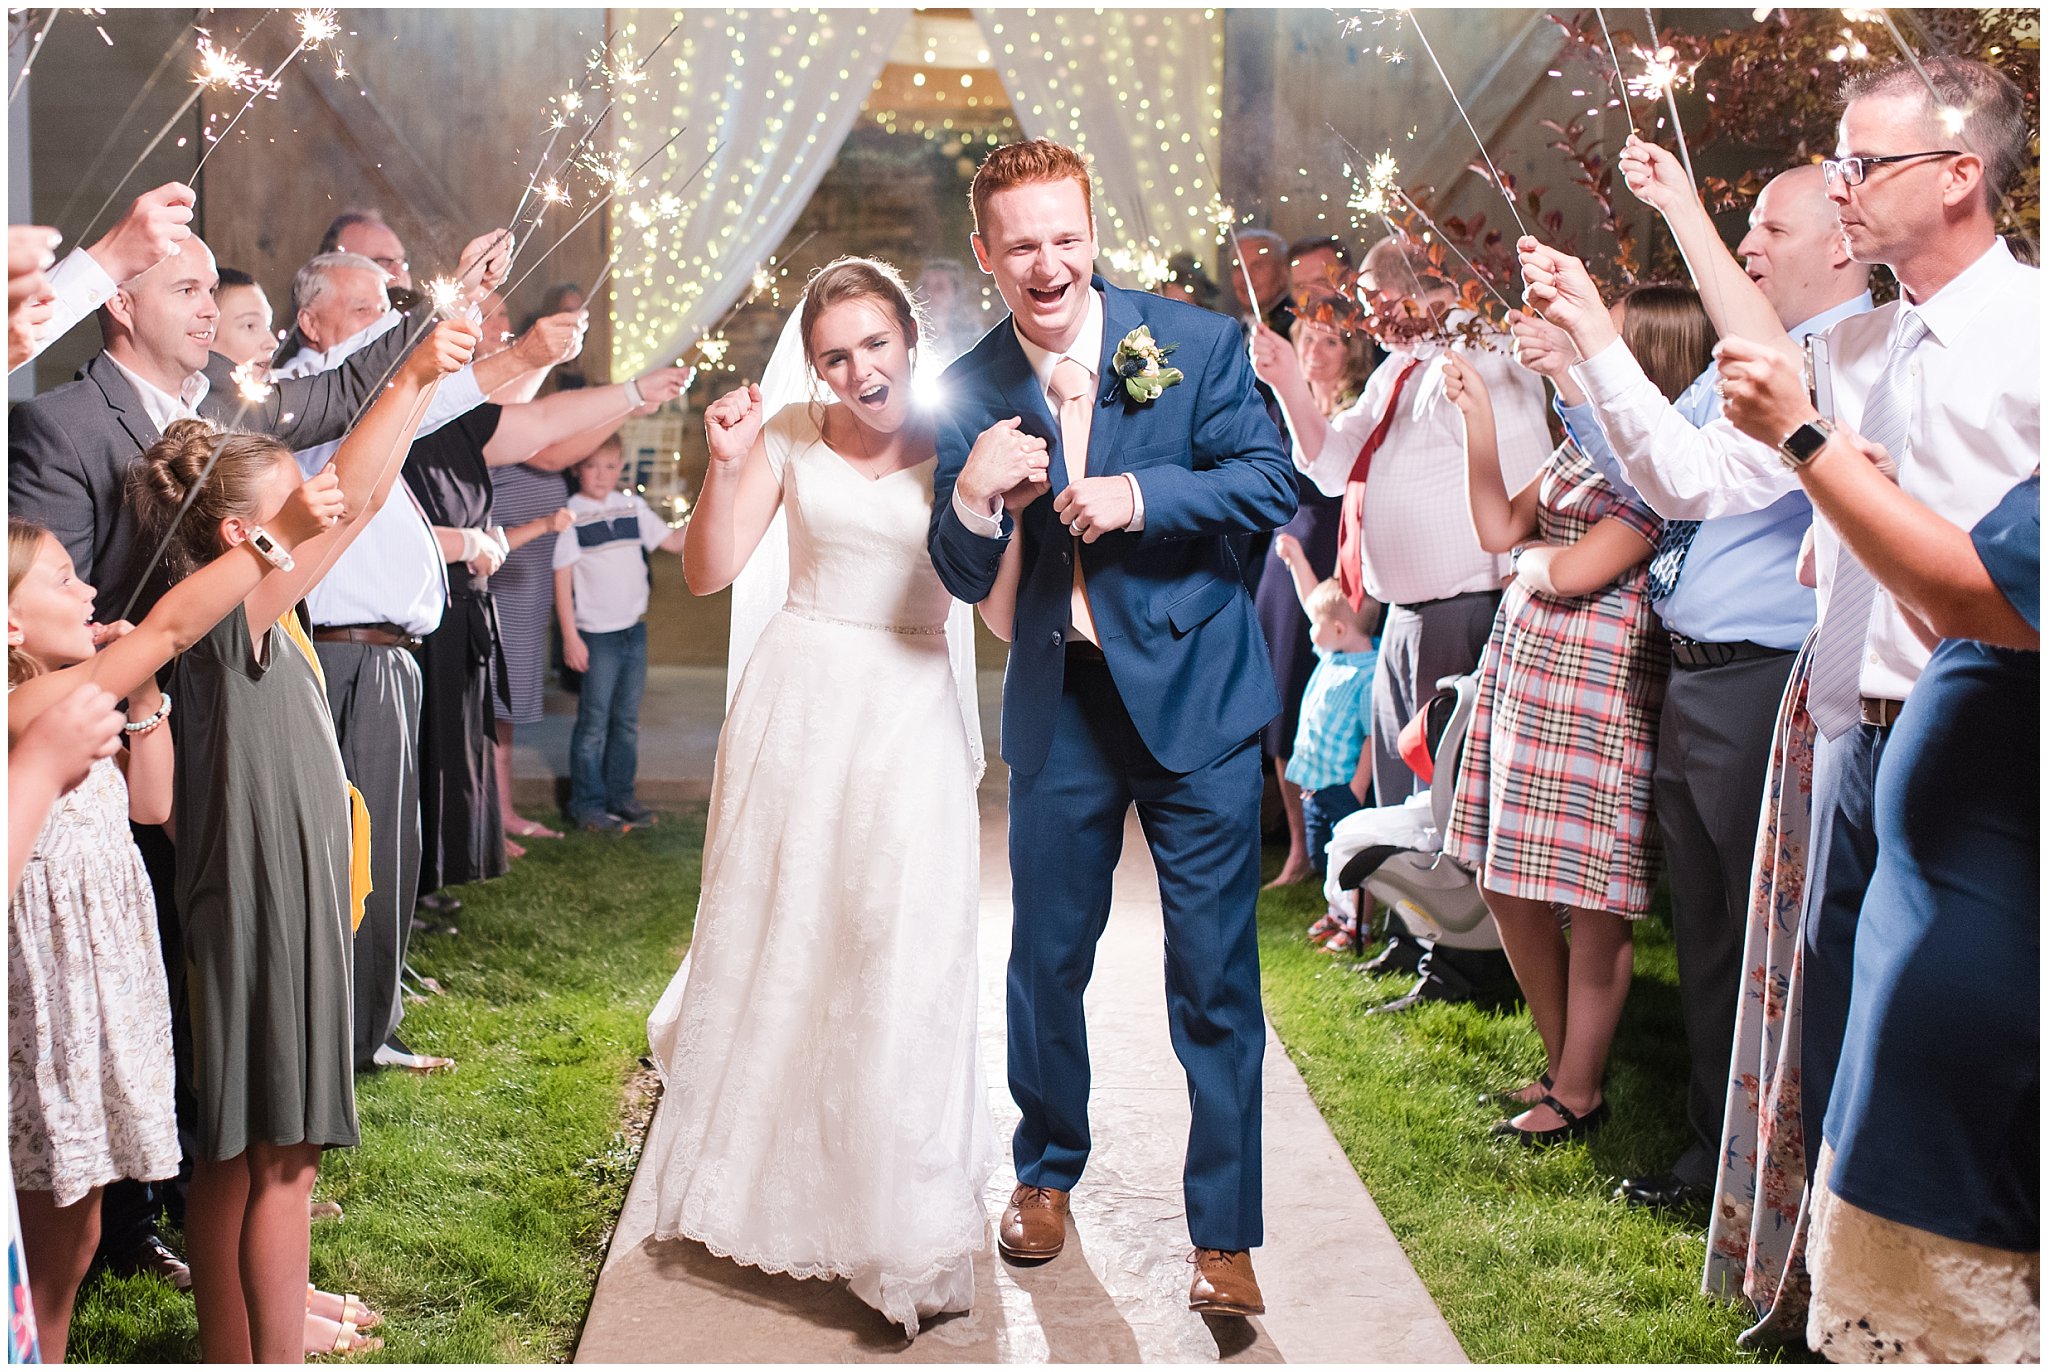 Sparkler exit sendoff with hanging string lights above bride and groom | Oak Hills Reception and Events Center | Jessie and Dallin Photography